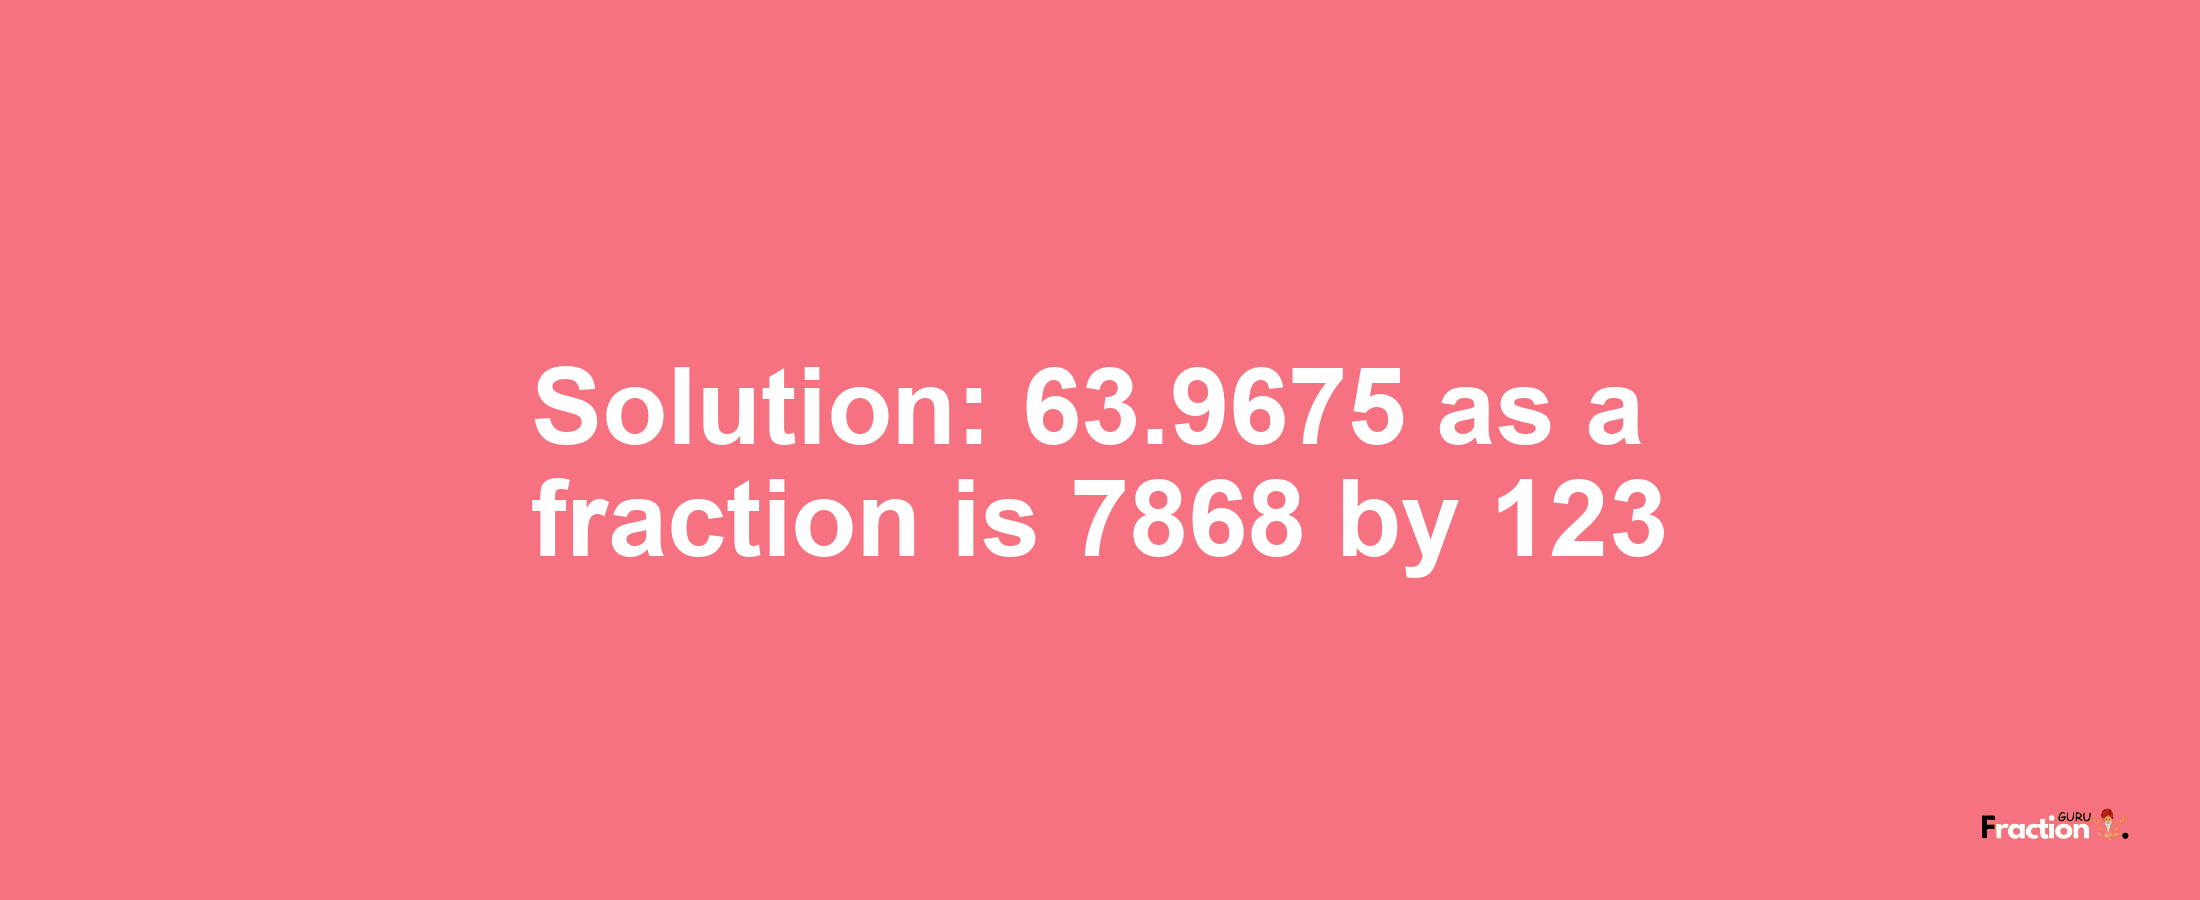 Solution:63.9675 as a fraction is 7868/123